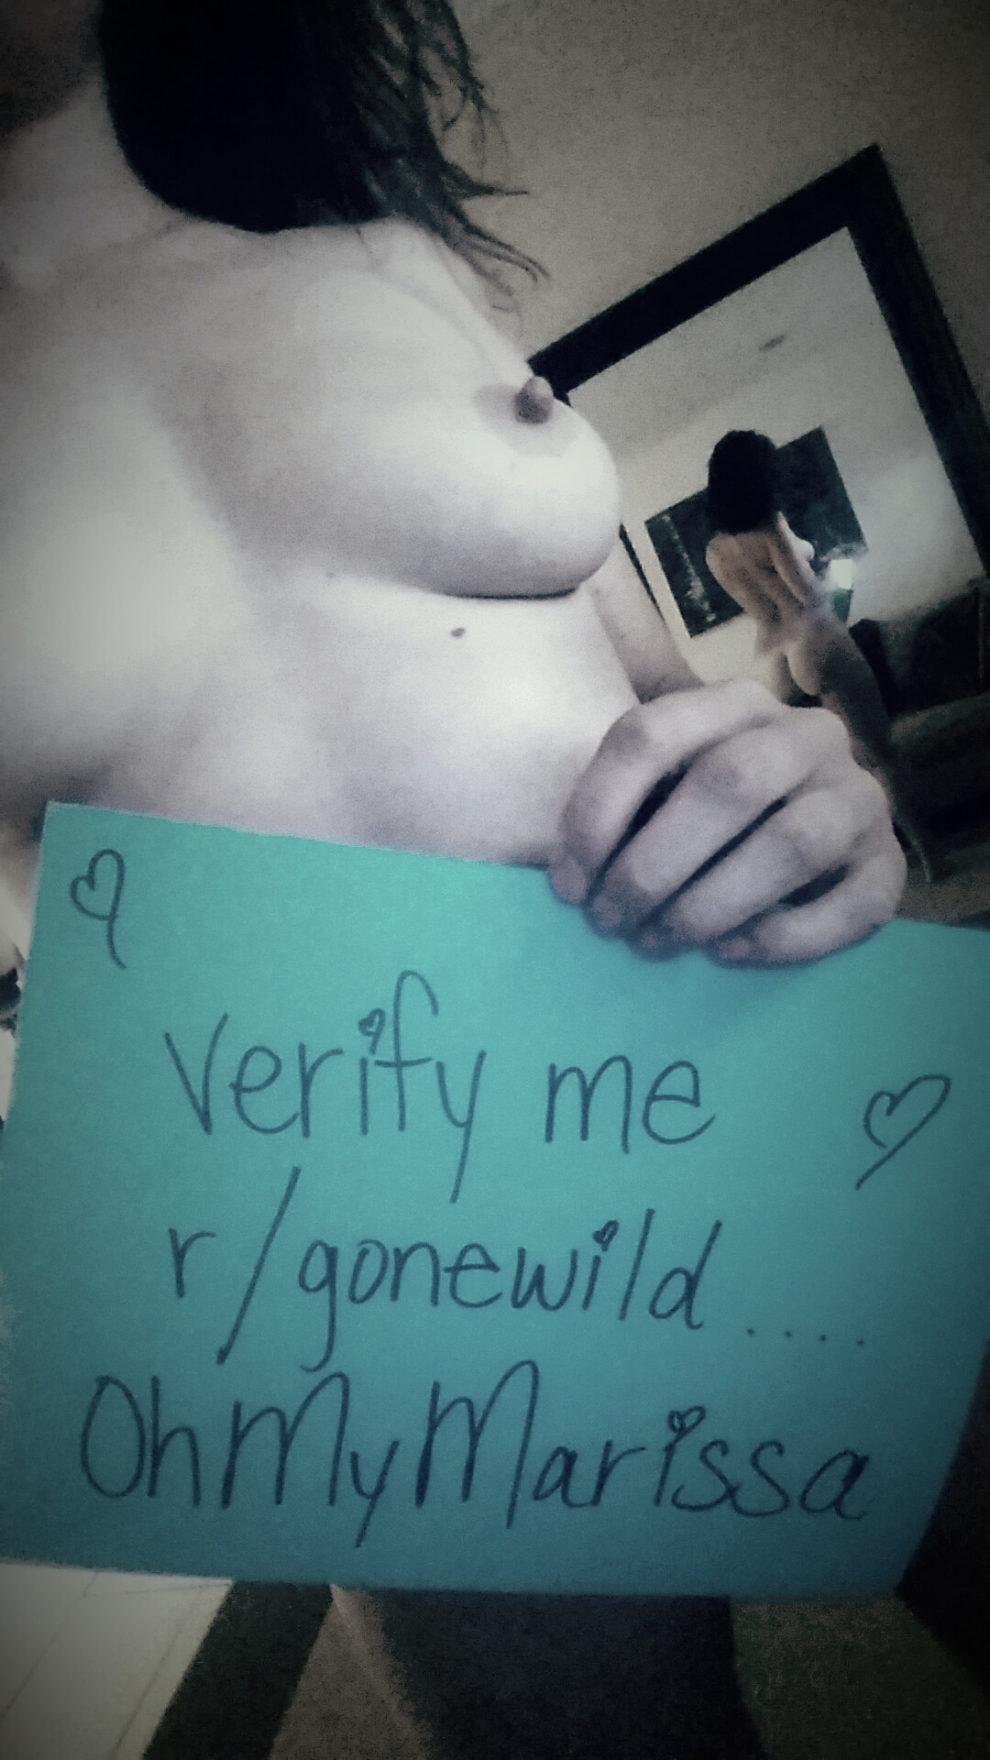 Can someone please veri[f]y me? Think I need a thorough verification... ????